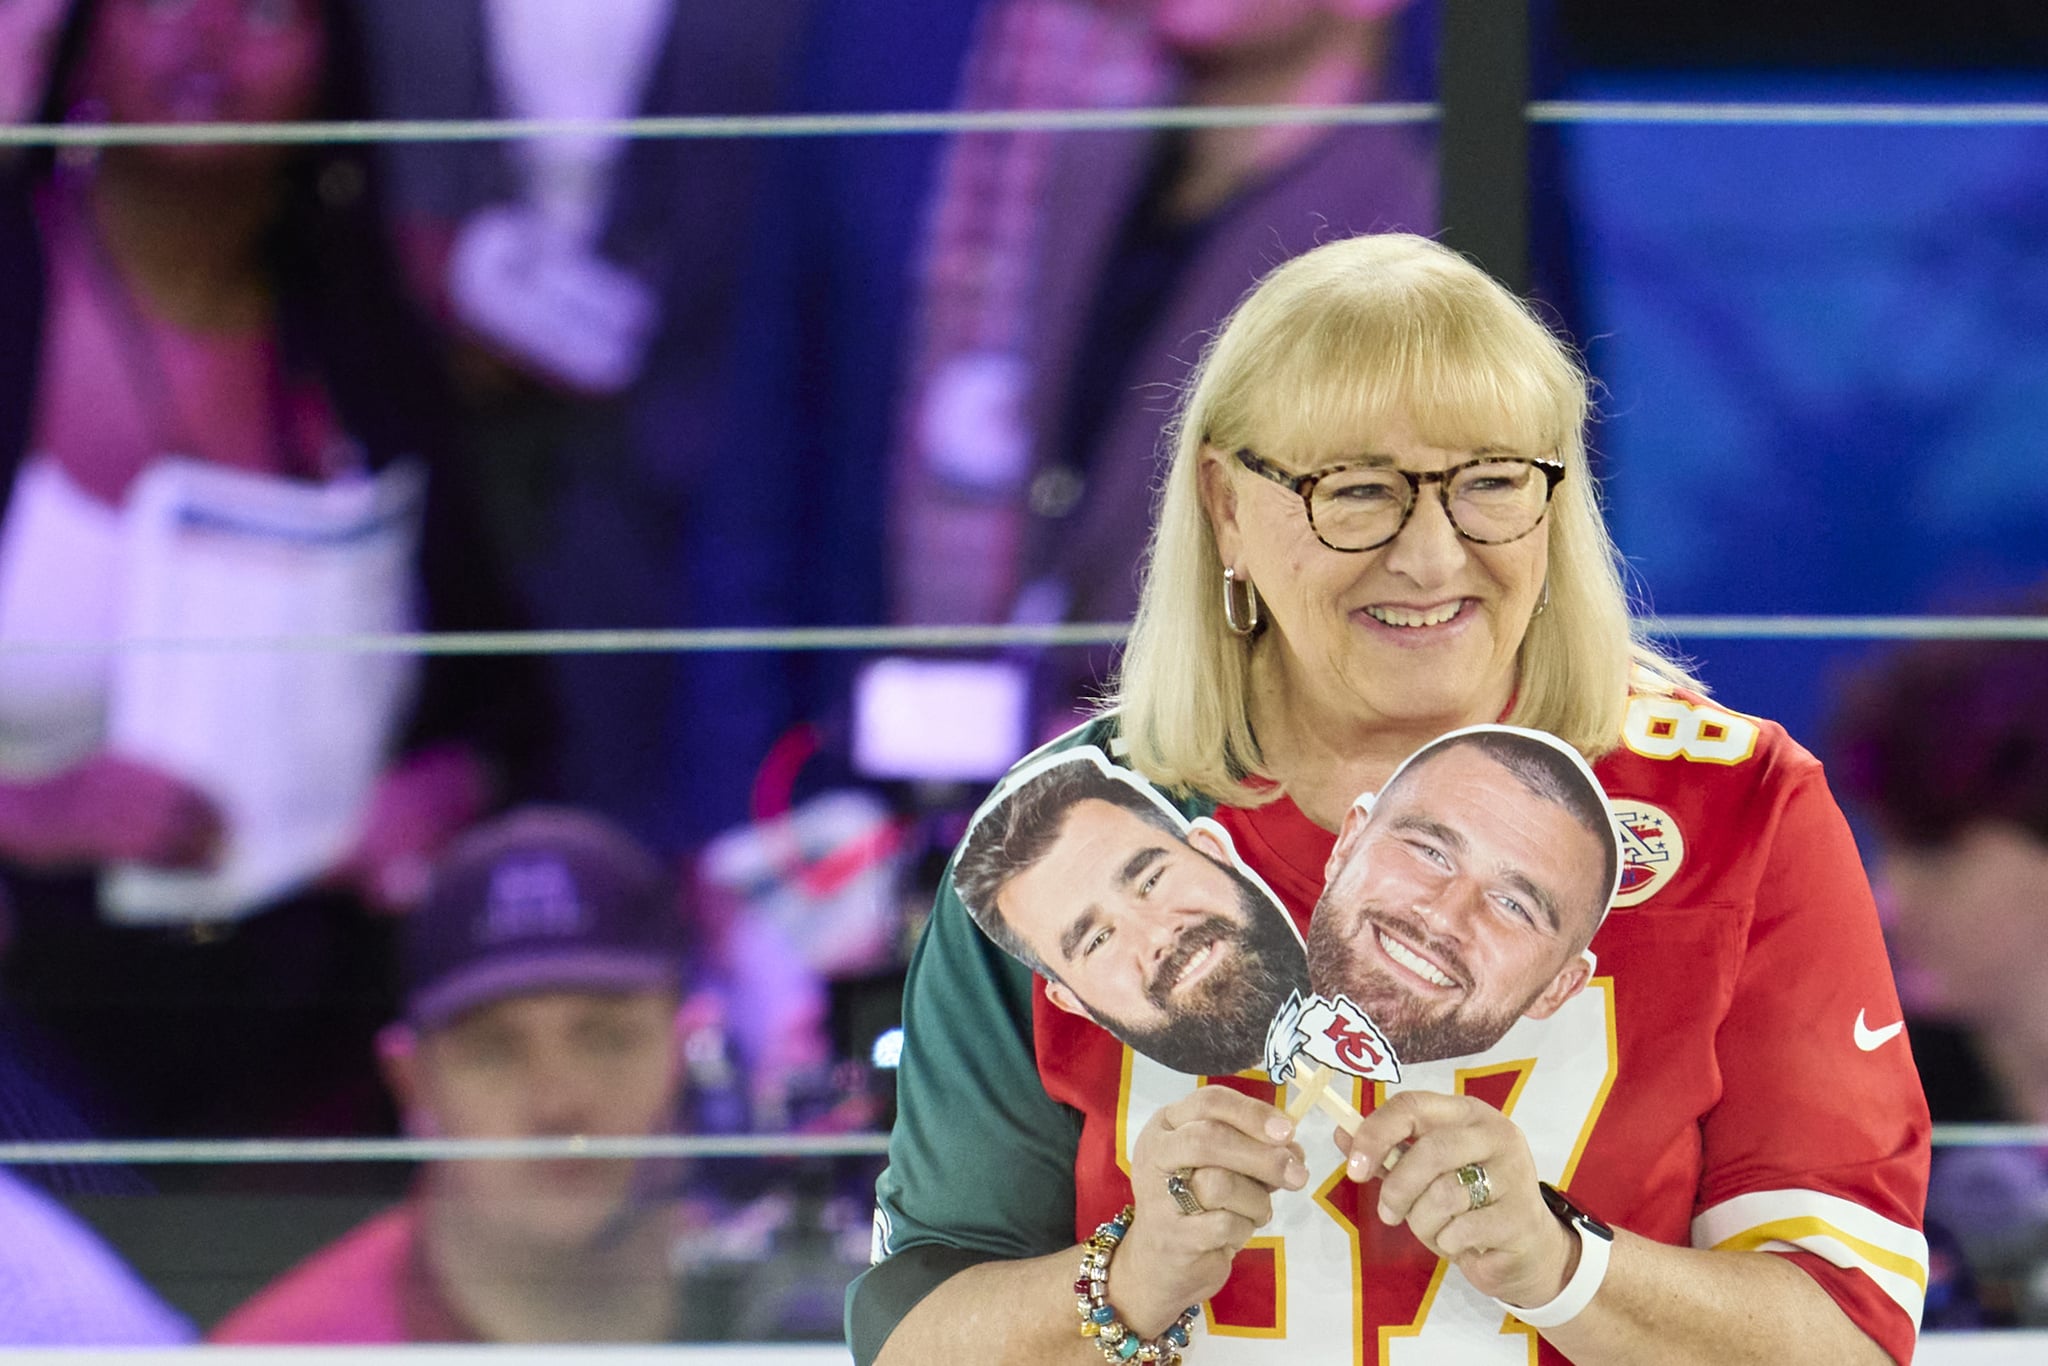 Donna Kelce holds up photos of her sons, Jason Kelce #62 of the Philadelphia Eagles and Travis Kelce #87 of the Kansas City Chiefs at Footprint Centre on February 6, 2023 in Phoenix, Arizona